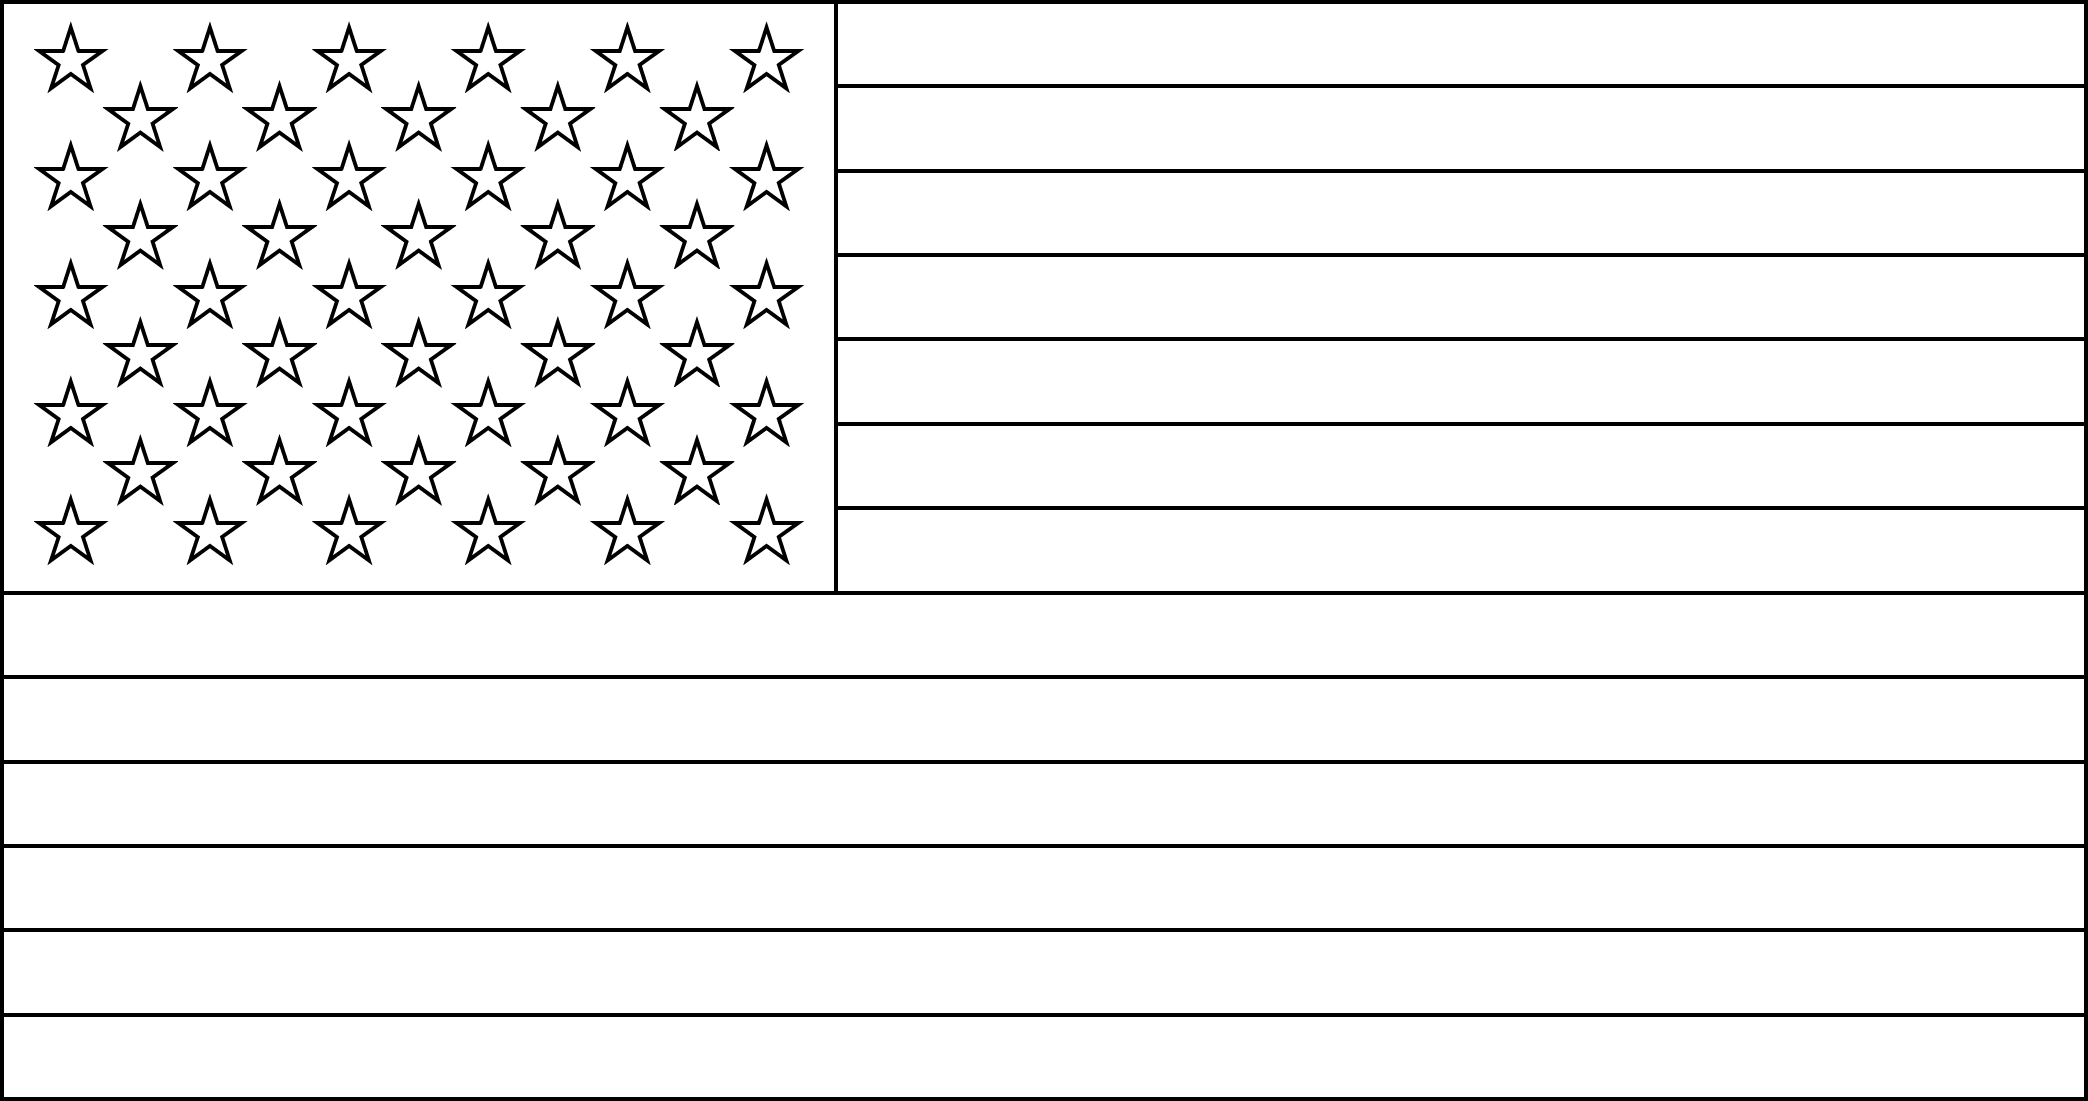 American flag clipart black and white 